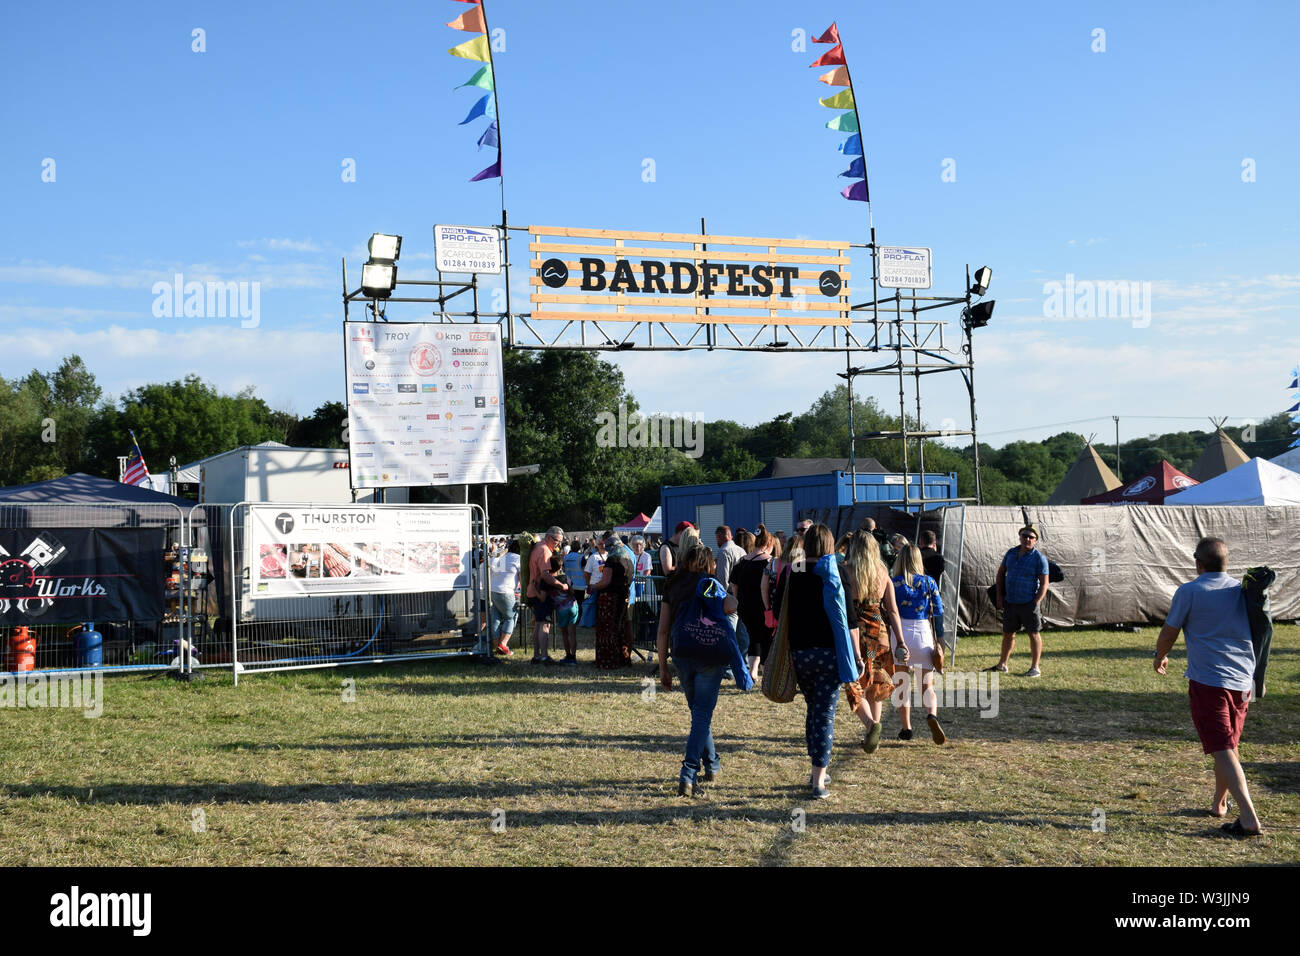 Bardfest, a small music festival in Bardwell, Suffolk, UK July 2019 Stock Photo